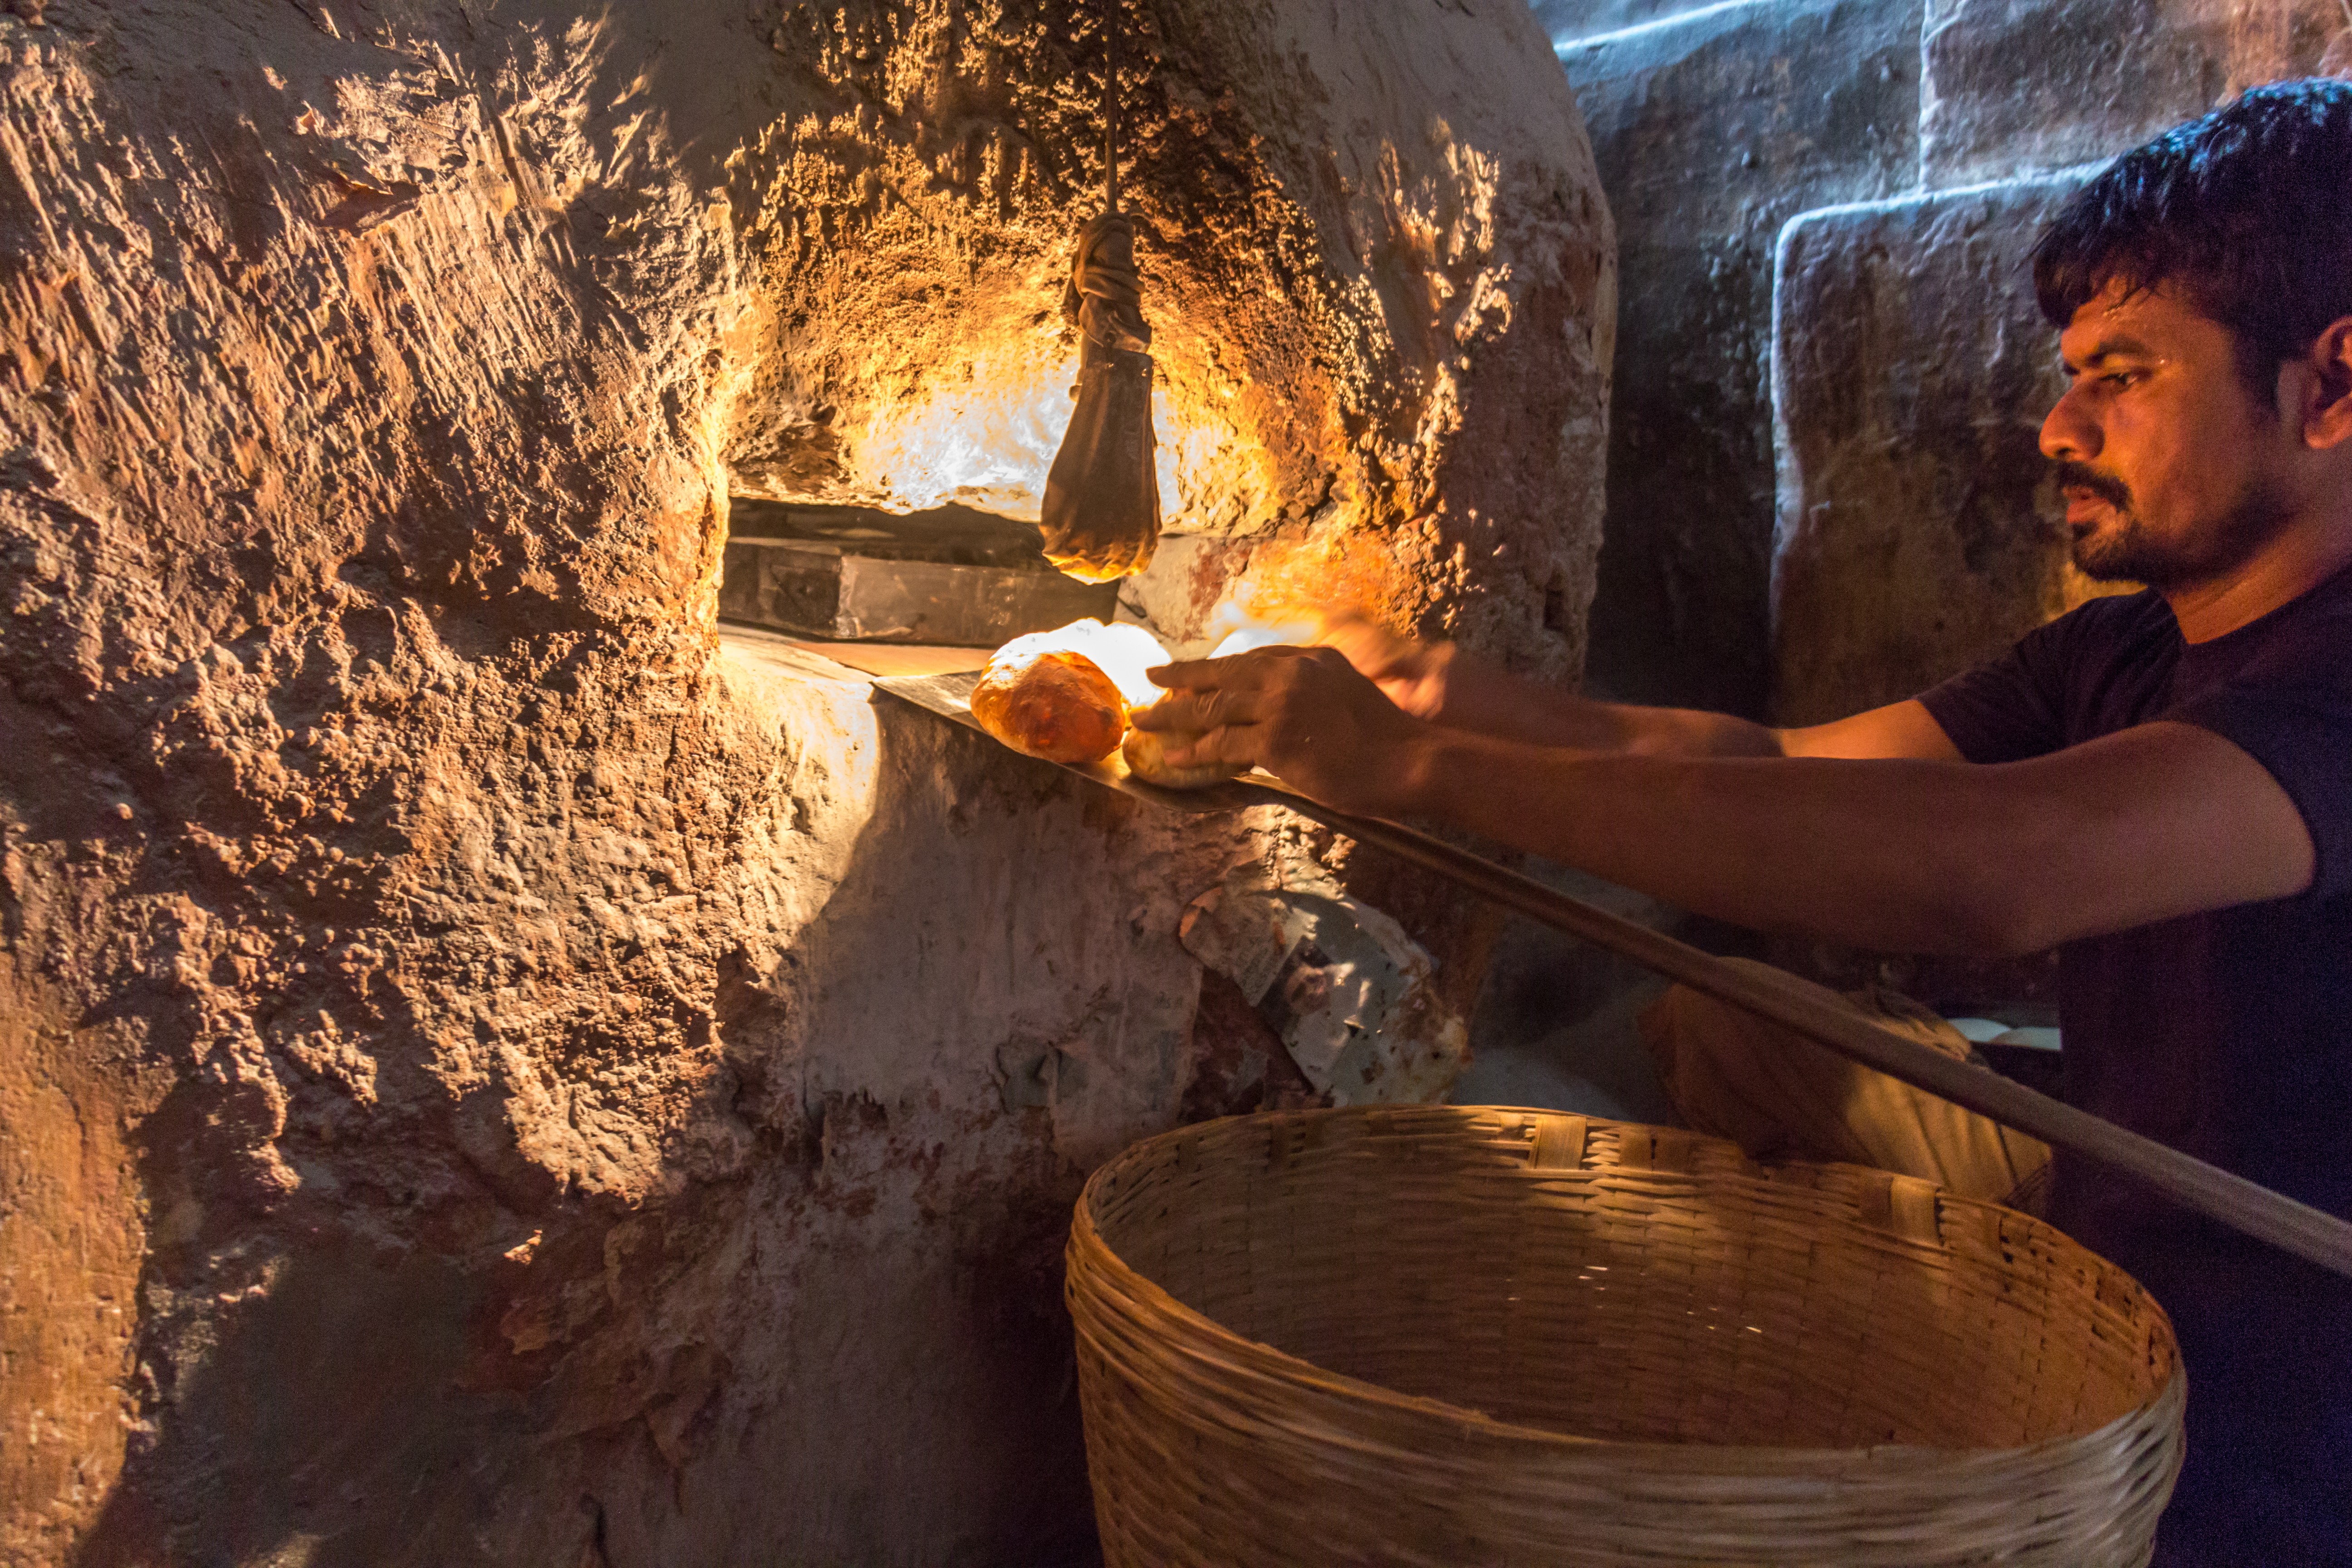 At the 100-year-old Fernandes Bakery in Verem, Goa, bread is baked in a traditional wood-fired oven. Photo: Rathina Sankari